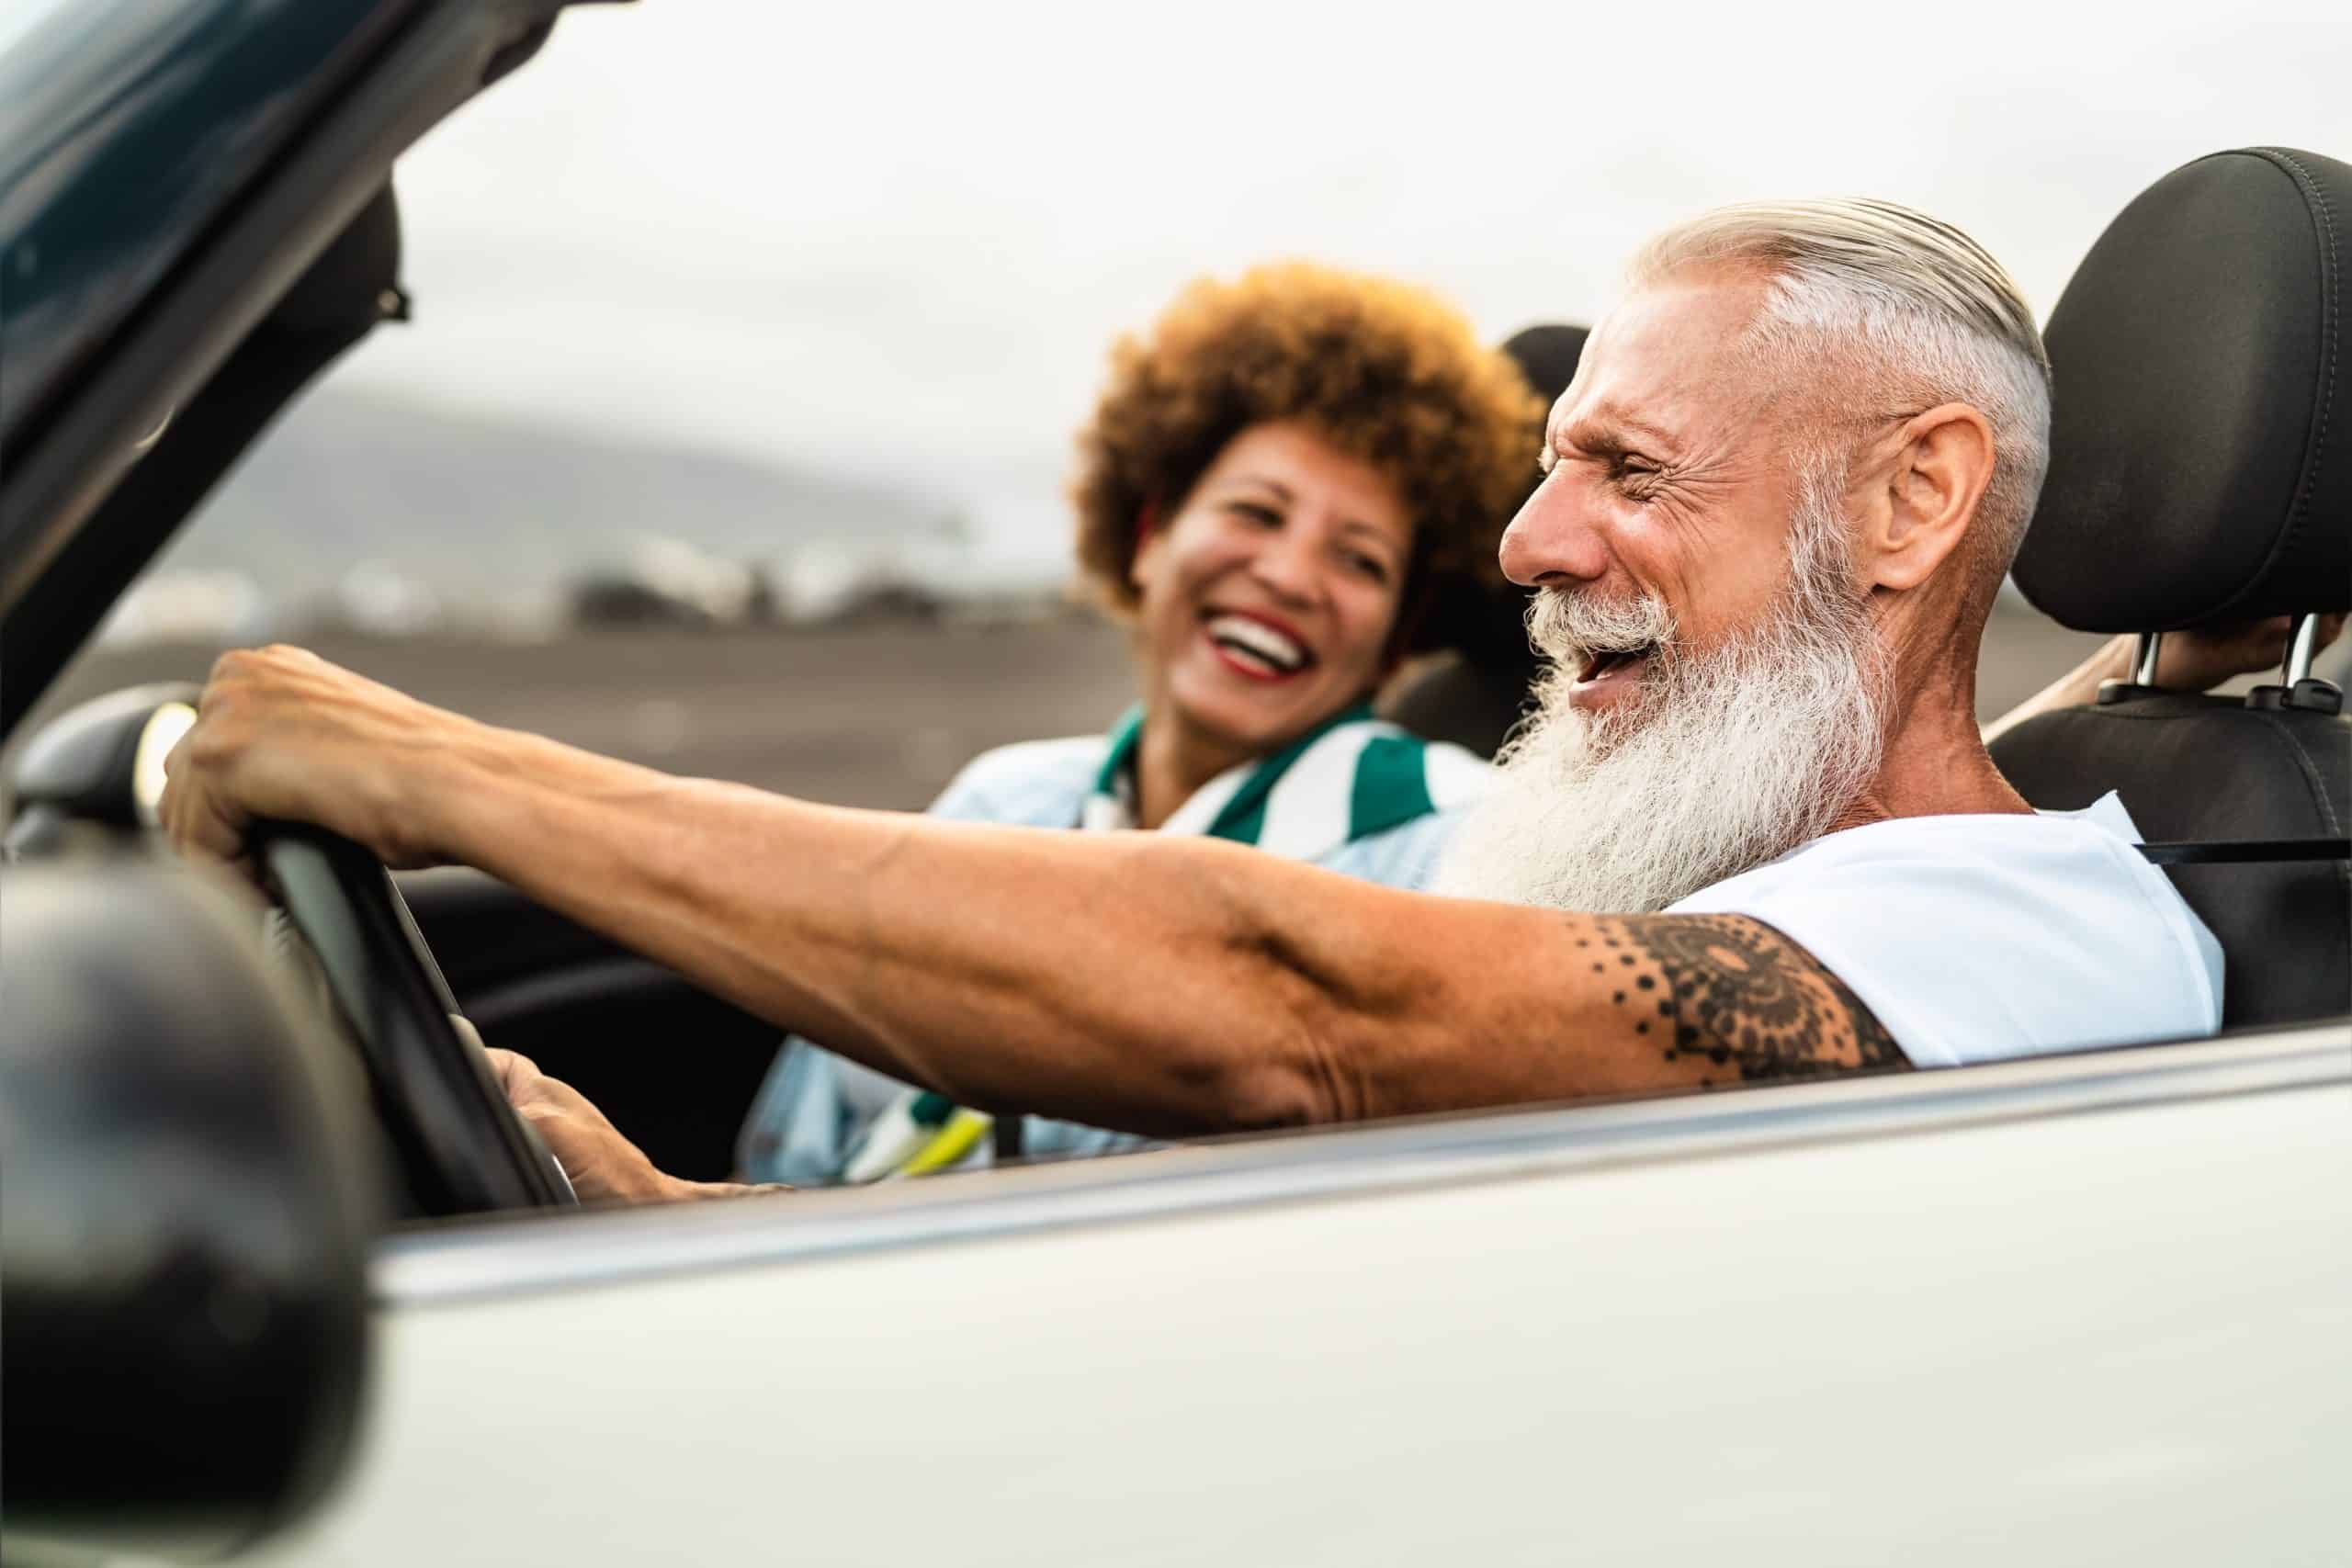 AARP members can save on rental cars from several major companies